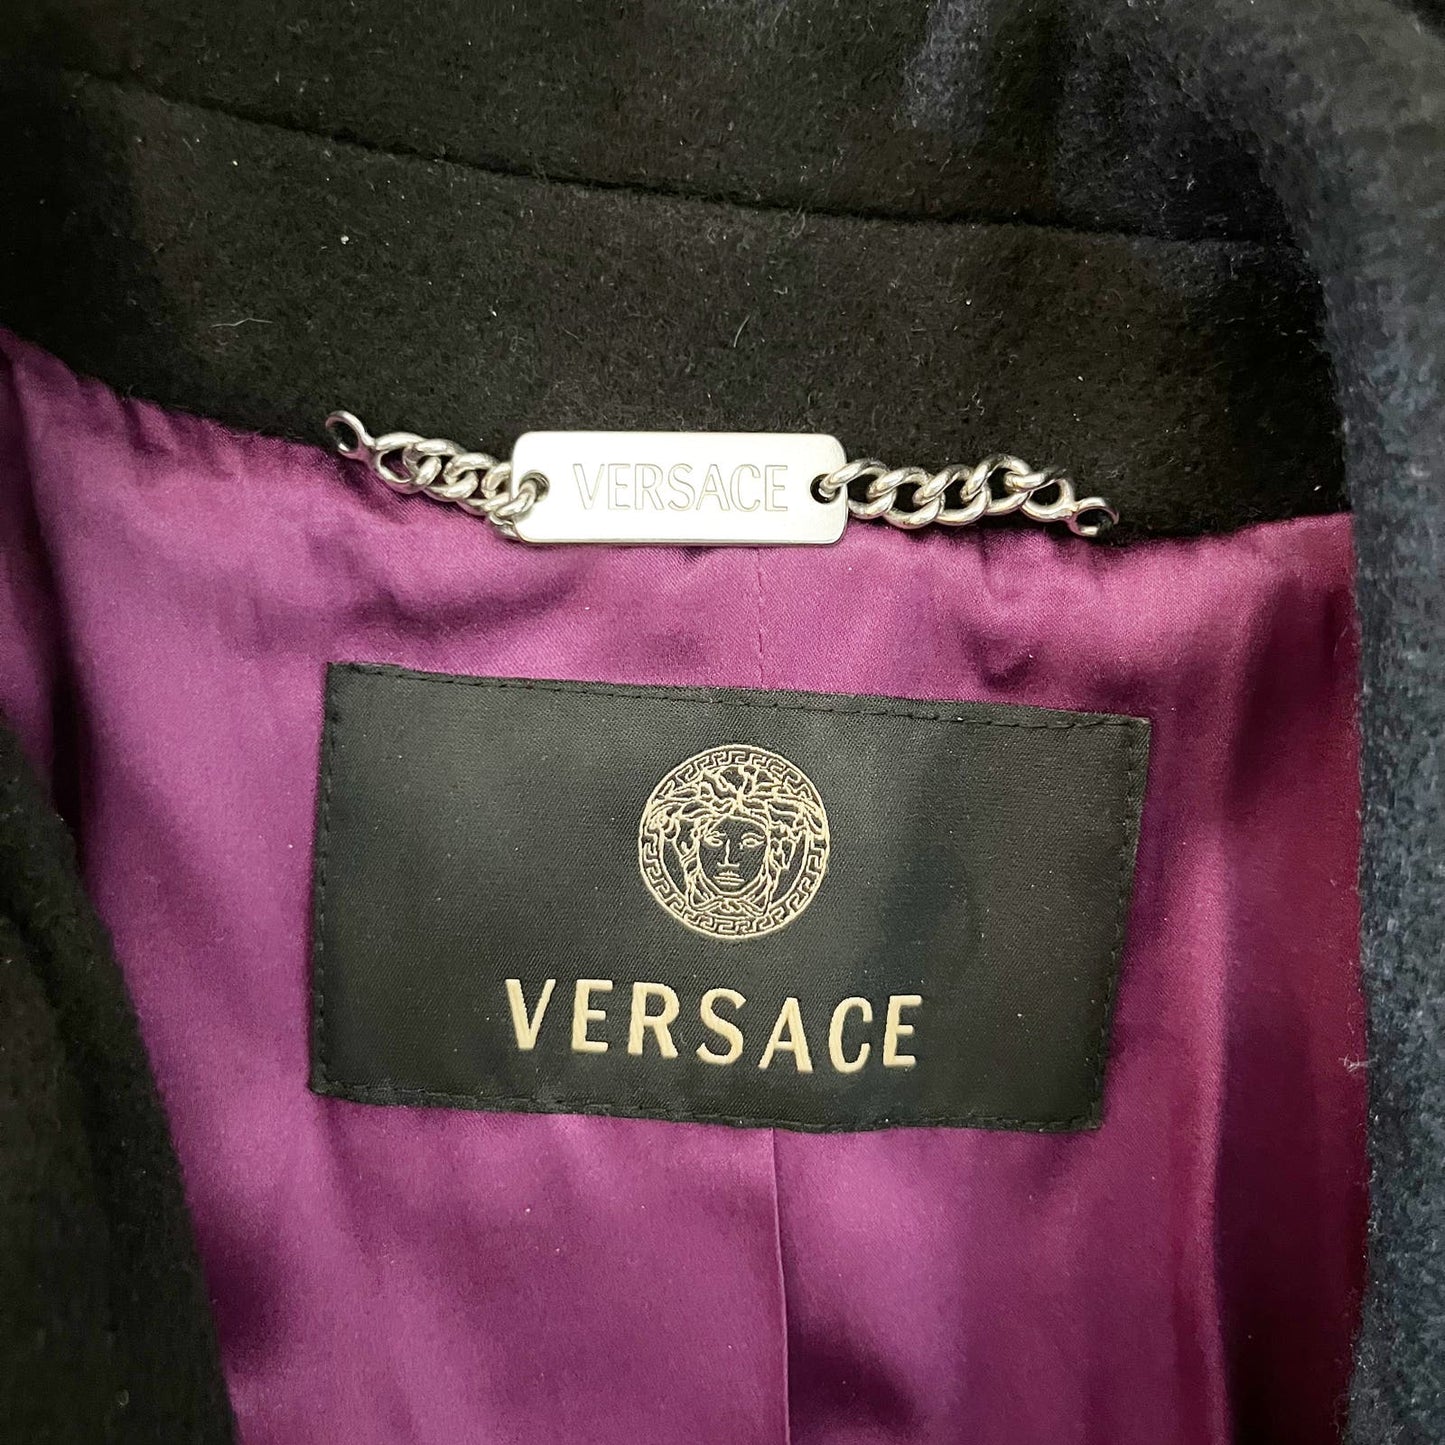 Gianni Versace Wool Cashmere Long Belted Peacoat Jacket Black 12